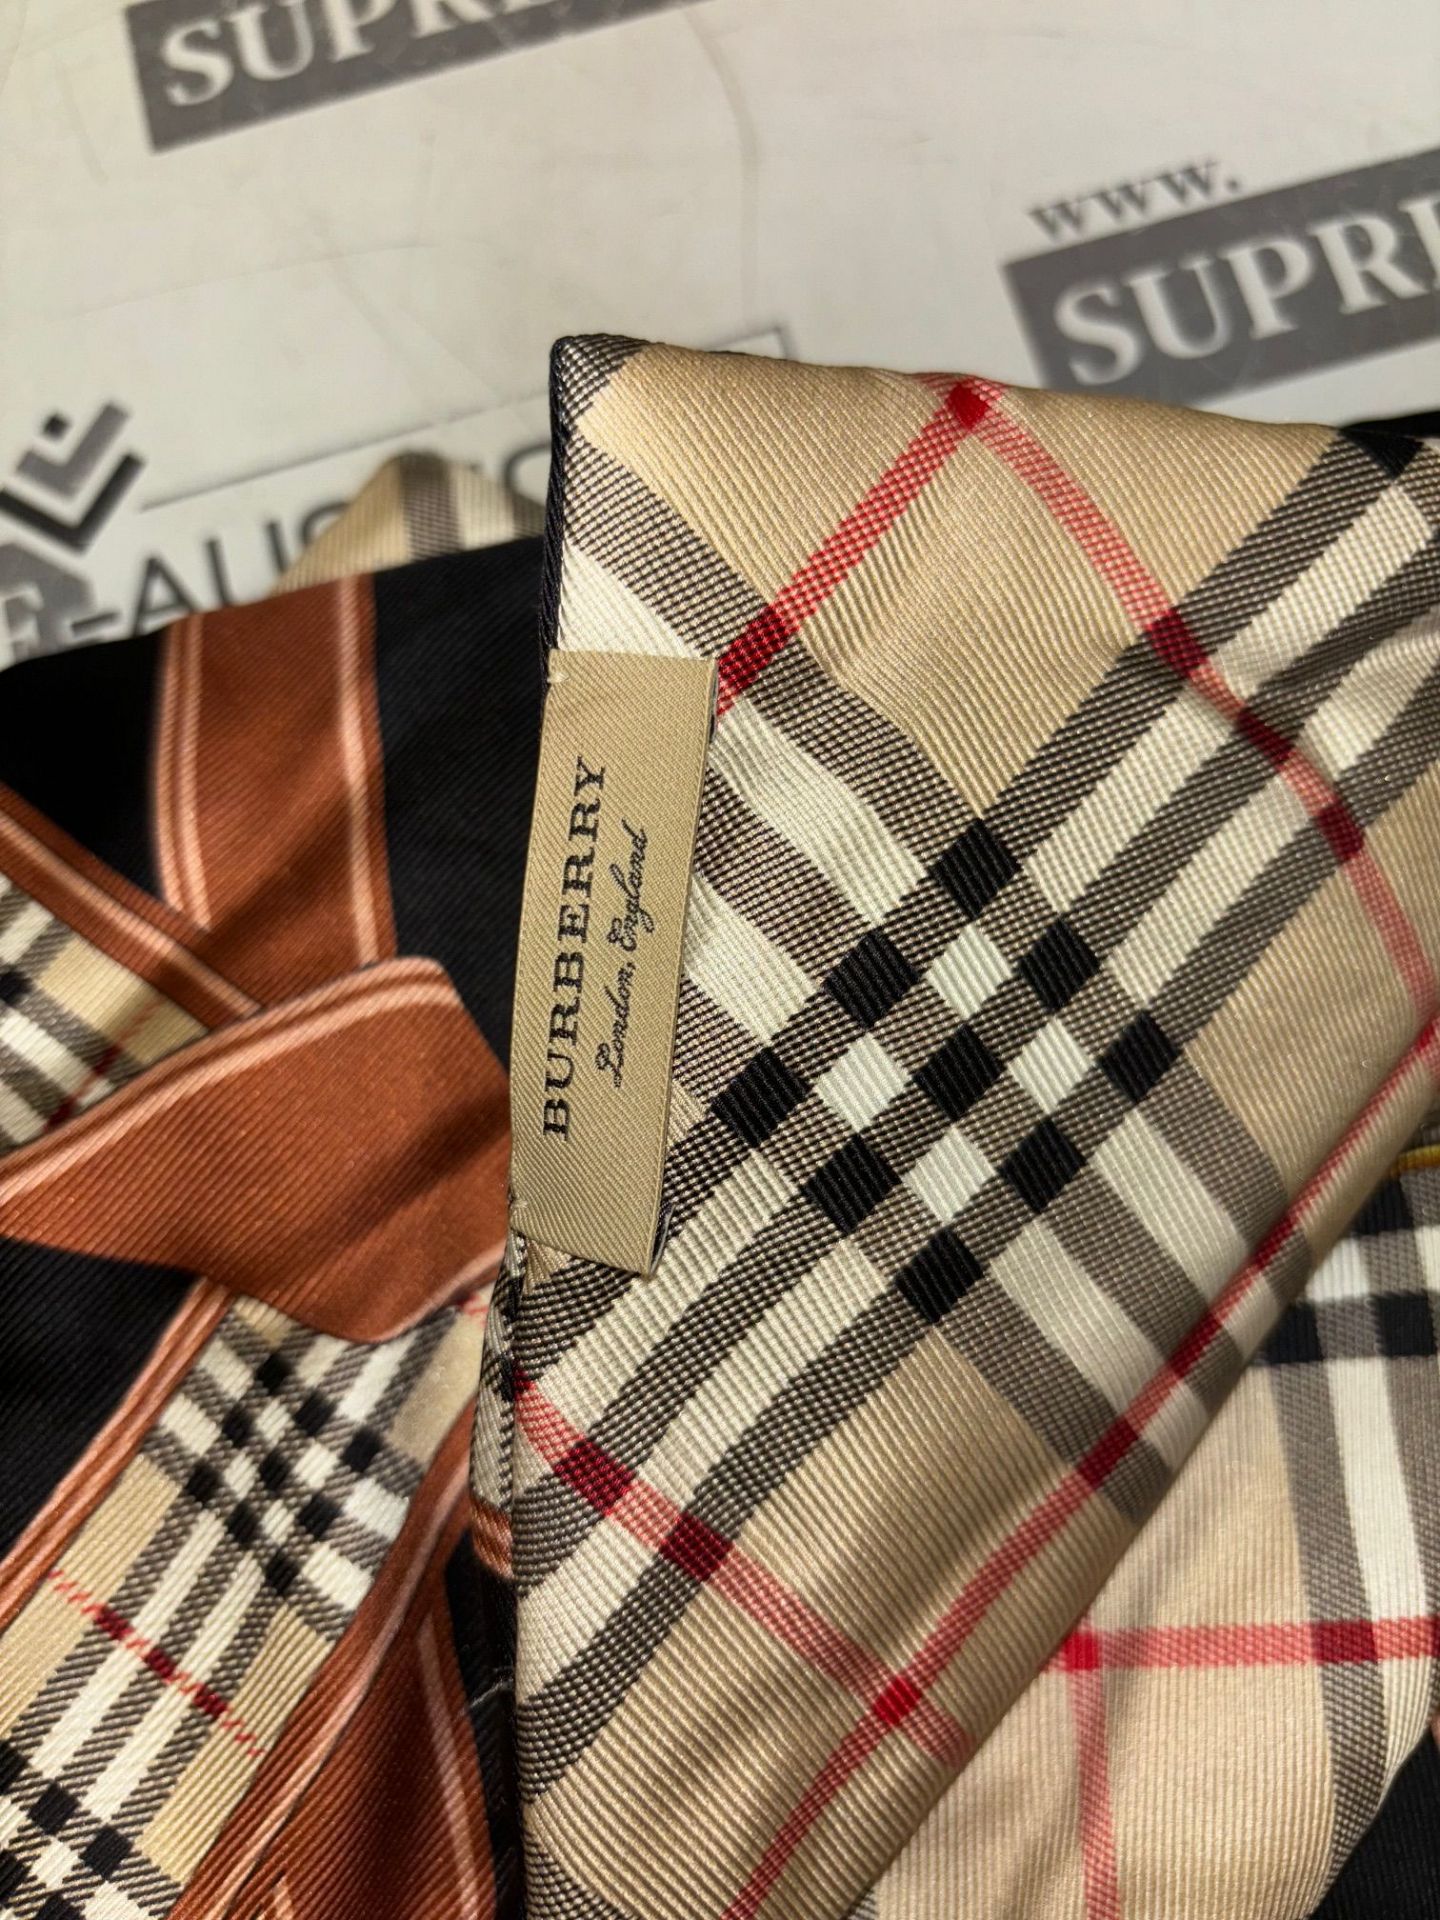 Genuine Burberry archive mulberry padded silk scarf - Image 4 of 5